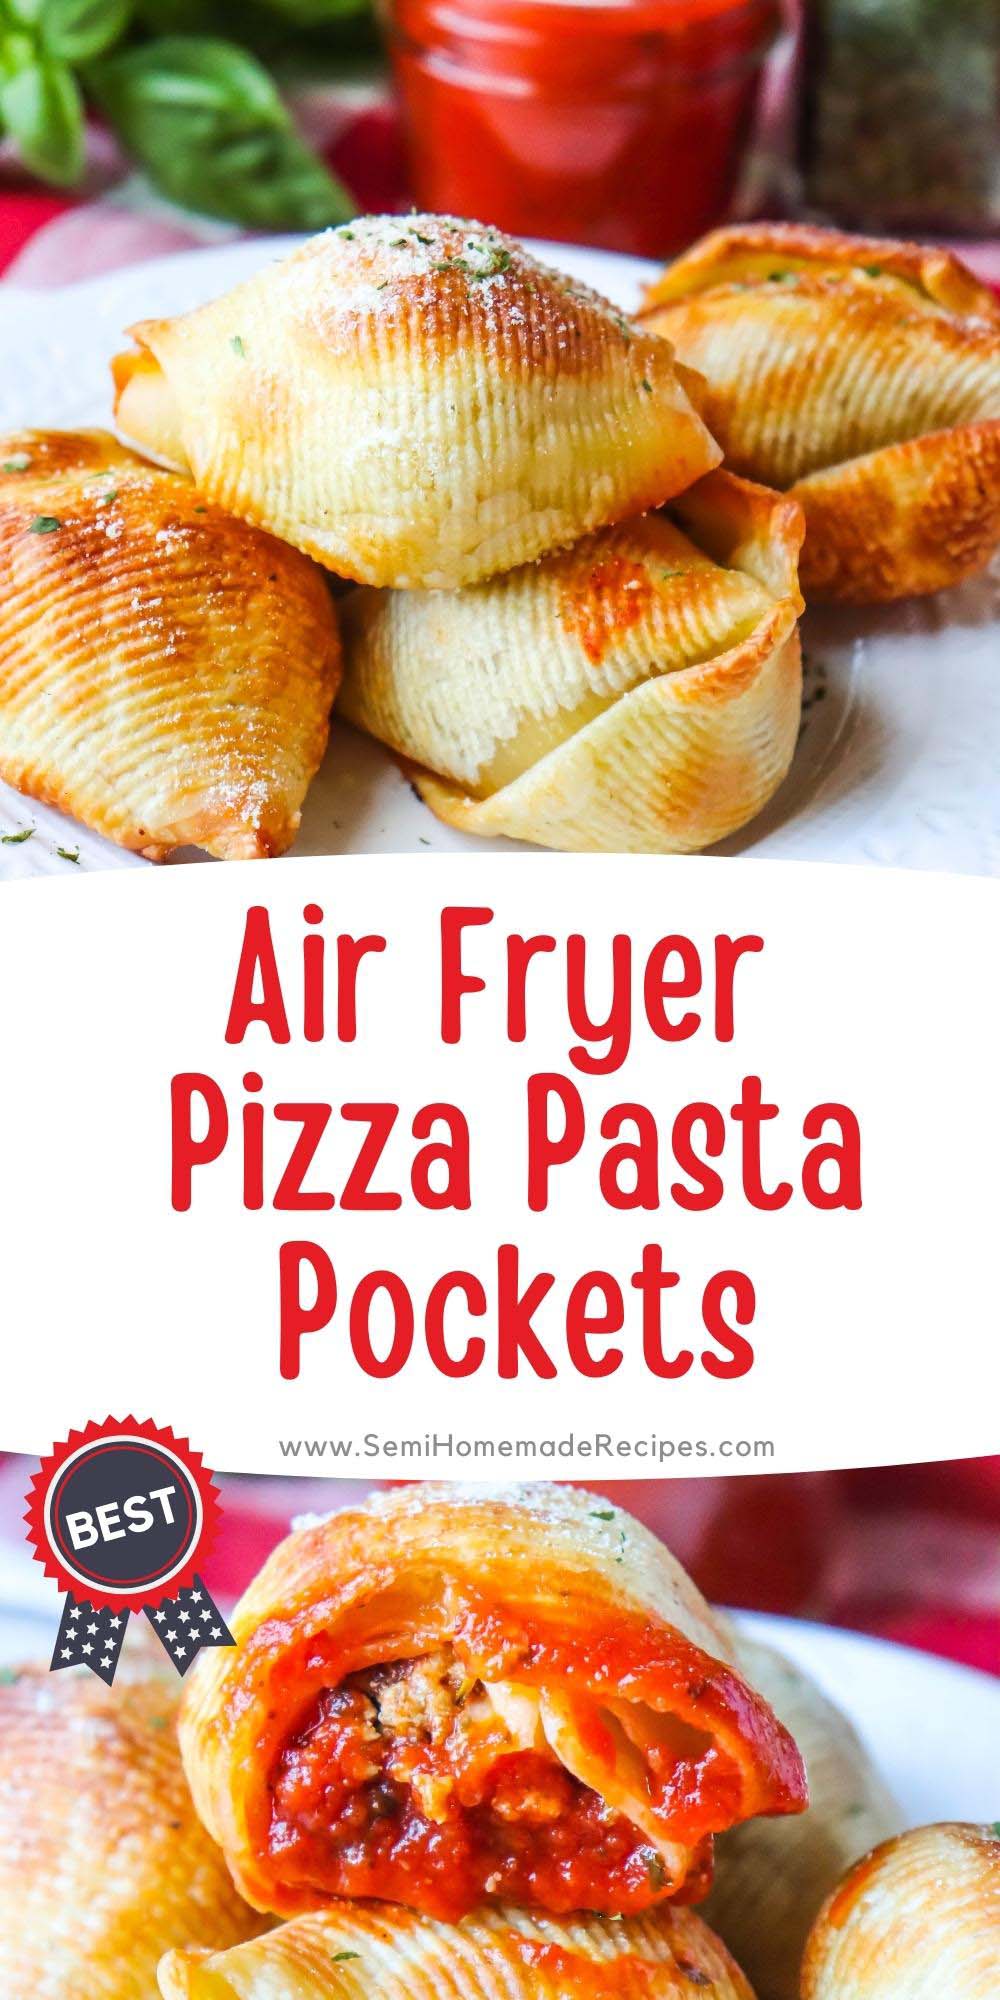 Air Fryer Pizza Pasta Pockets - Crispy Shells stuffed with ground beef or ground turkey, pizza sauce and fresh mozzarella pearls! Top these Pizza pockets with parmesan cheese and parsley before dunking them into pizza sauce for a great appetizer, dinner or snack! 